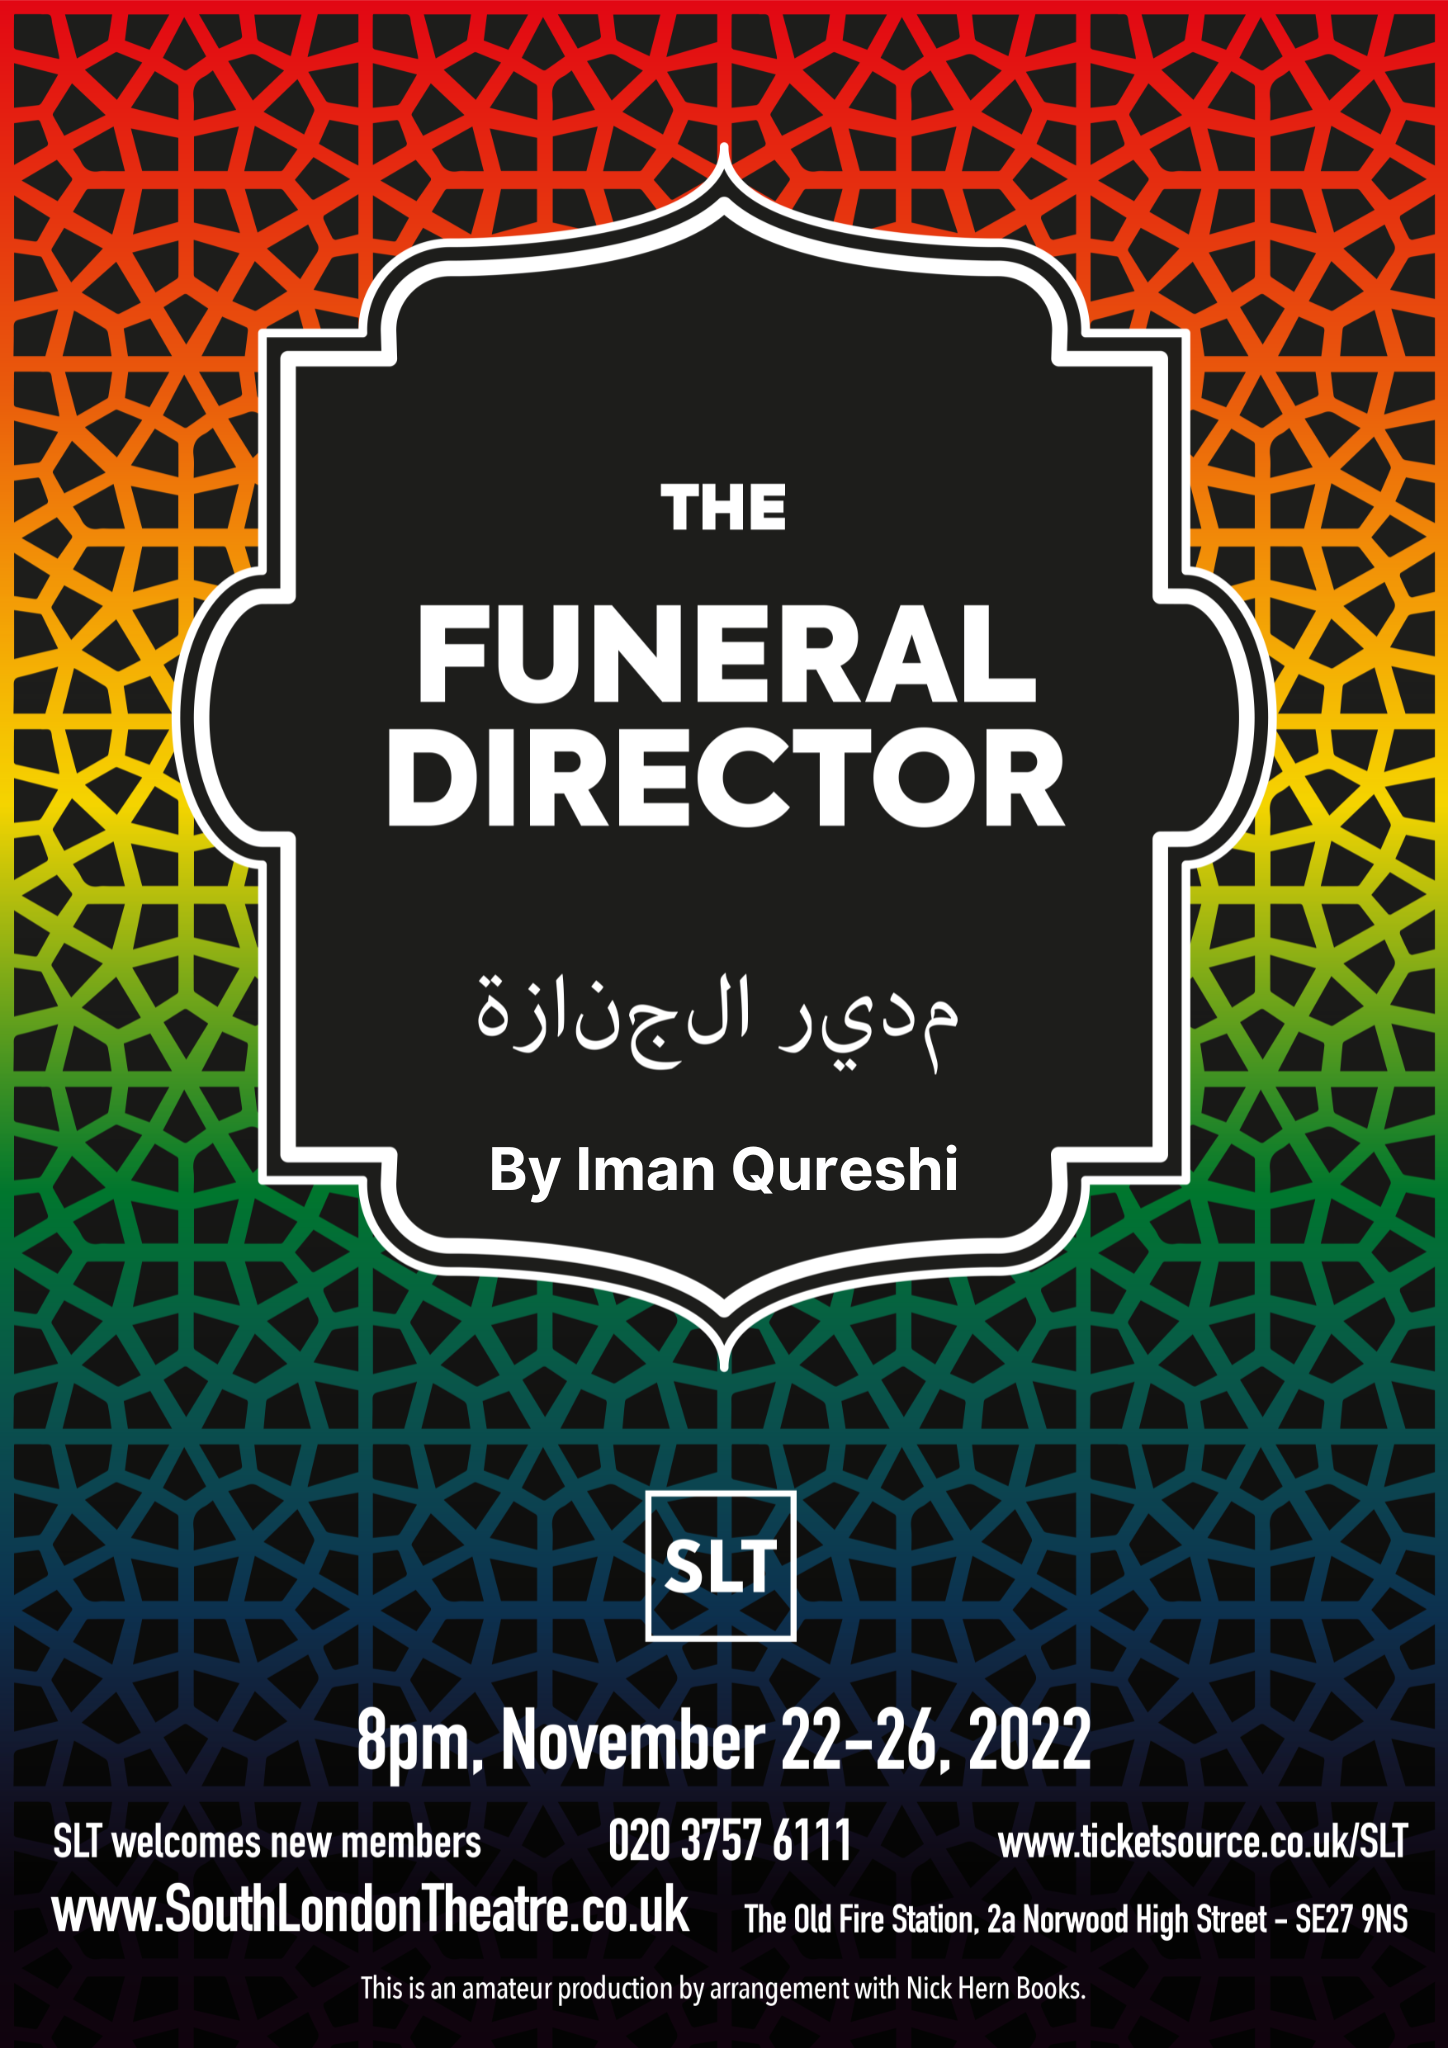 Funeral Director poster featuring monochrome plaque with show title in English and Arabic placed on an Islamic style filigree background in rainbow colours